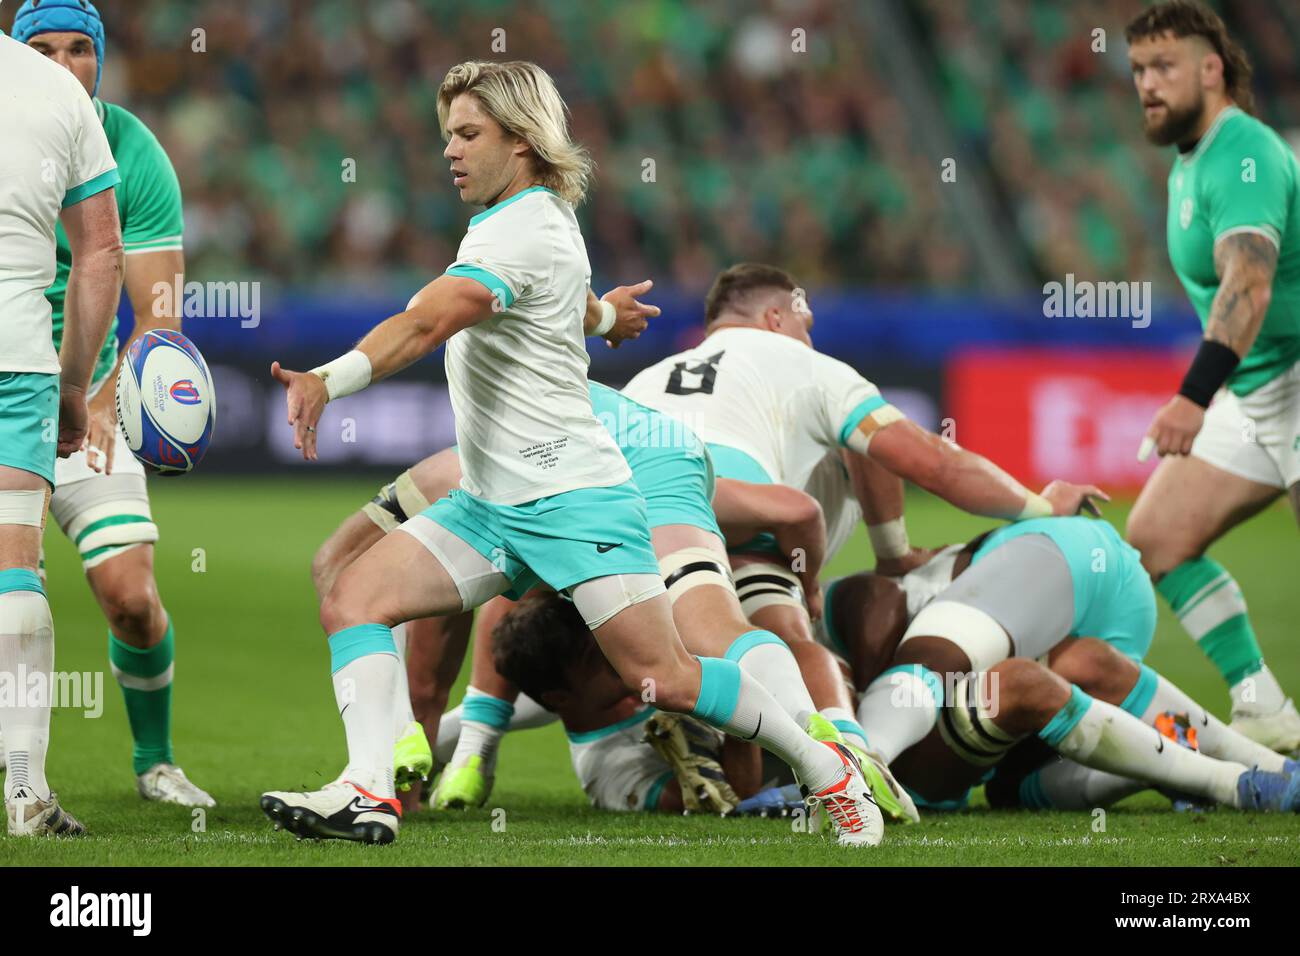 South Africa's Faf de Klerk during the 2023 Rugby World Cup Pool B match between South Africa and Ireland at the Stade de France in Saint-Denis, outside Paris, Saturday, Sept. 23, 2023. Credit: Aki Nagao/AFLO/Alamy Live News Stock Photo